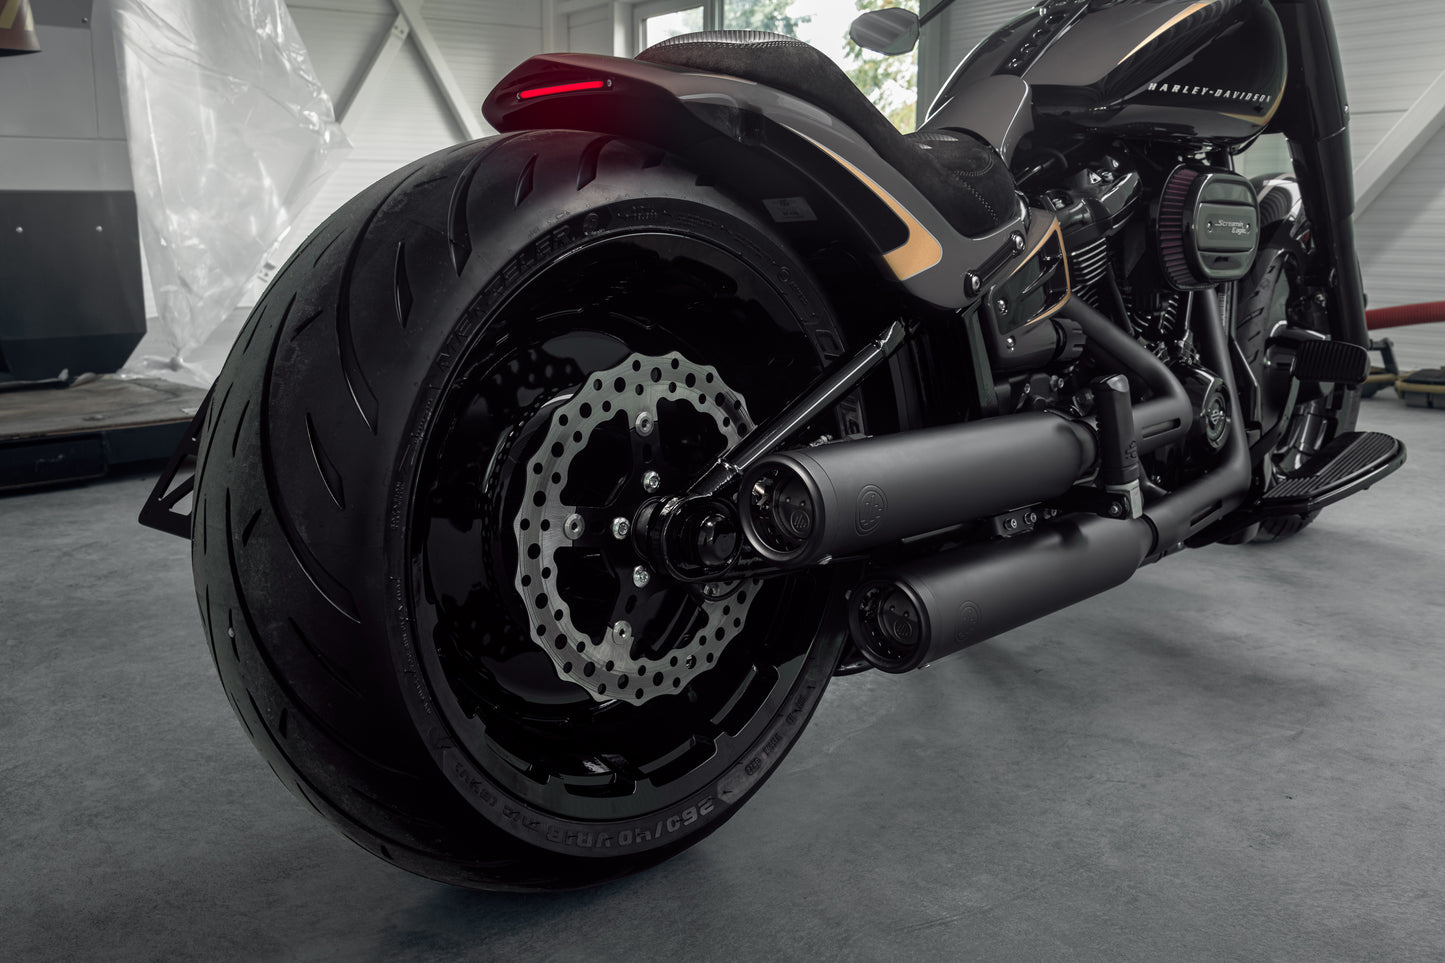 Zoomed Harley Davidson motorcycle with Killer Custom parts from the rear in a modern garage